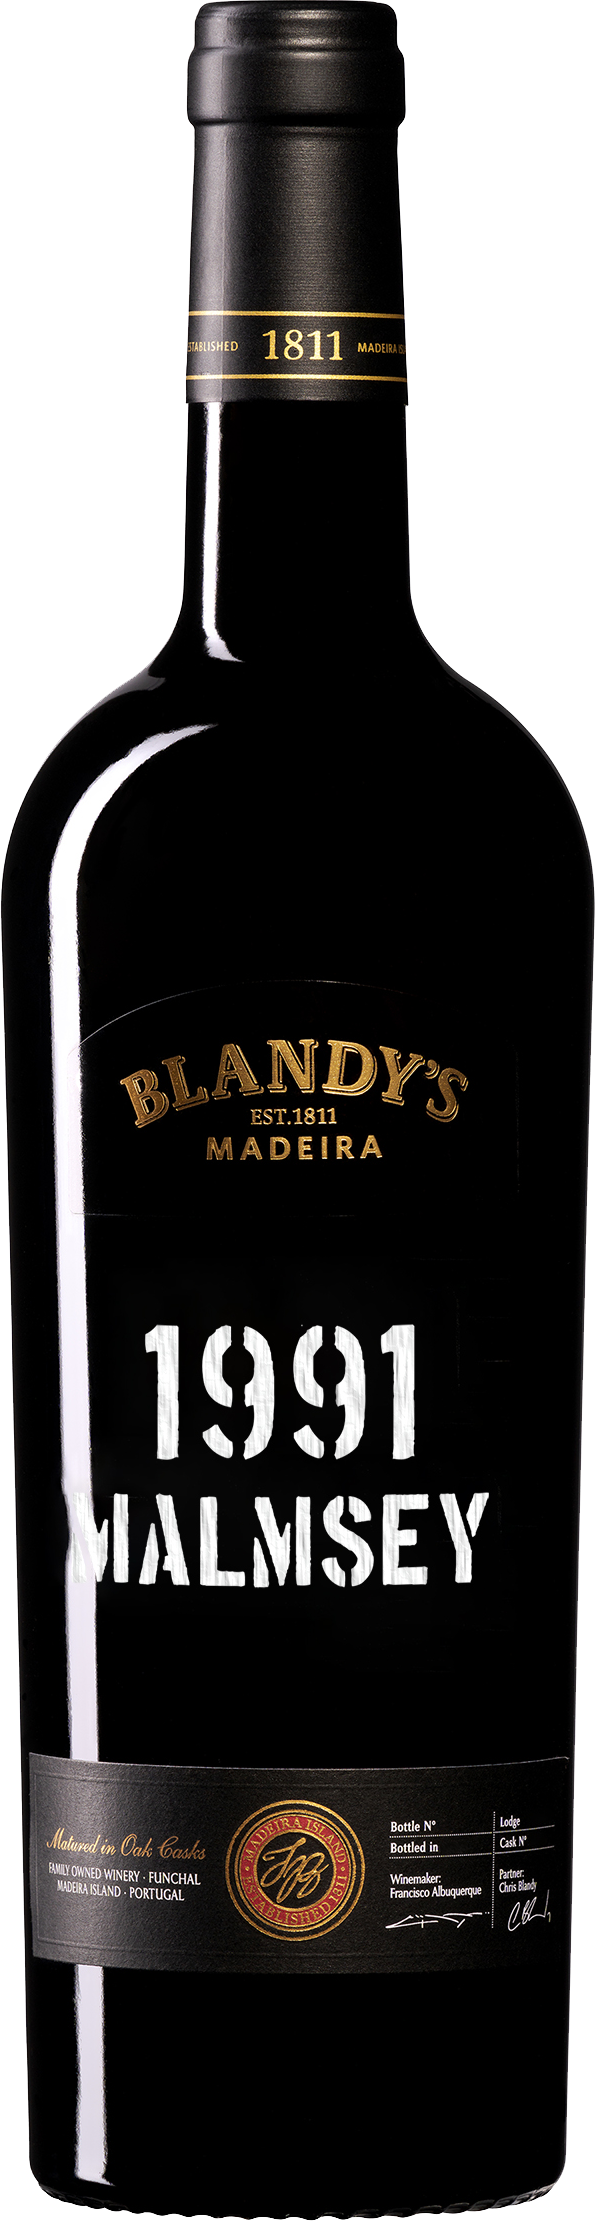 Product Image for BLANDY'S VINTAGE MALMSEY 1991